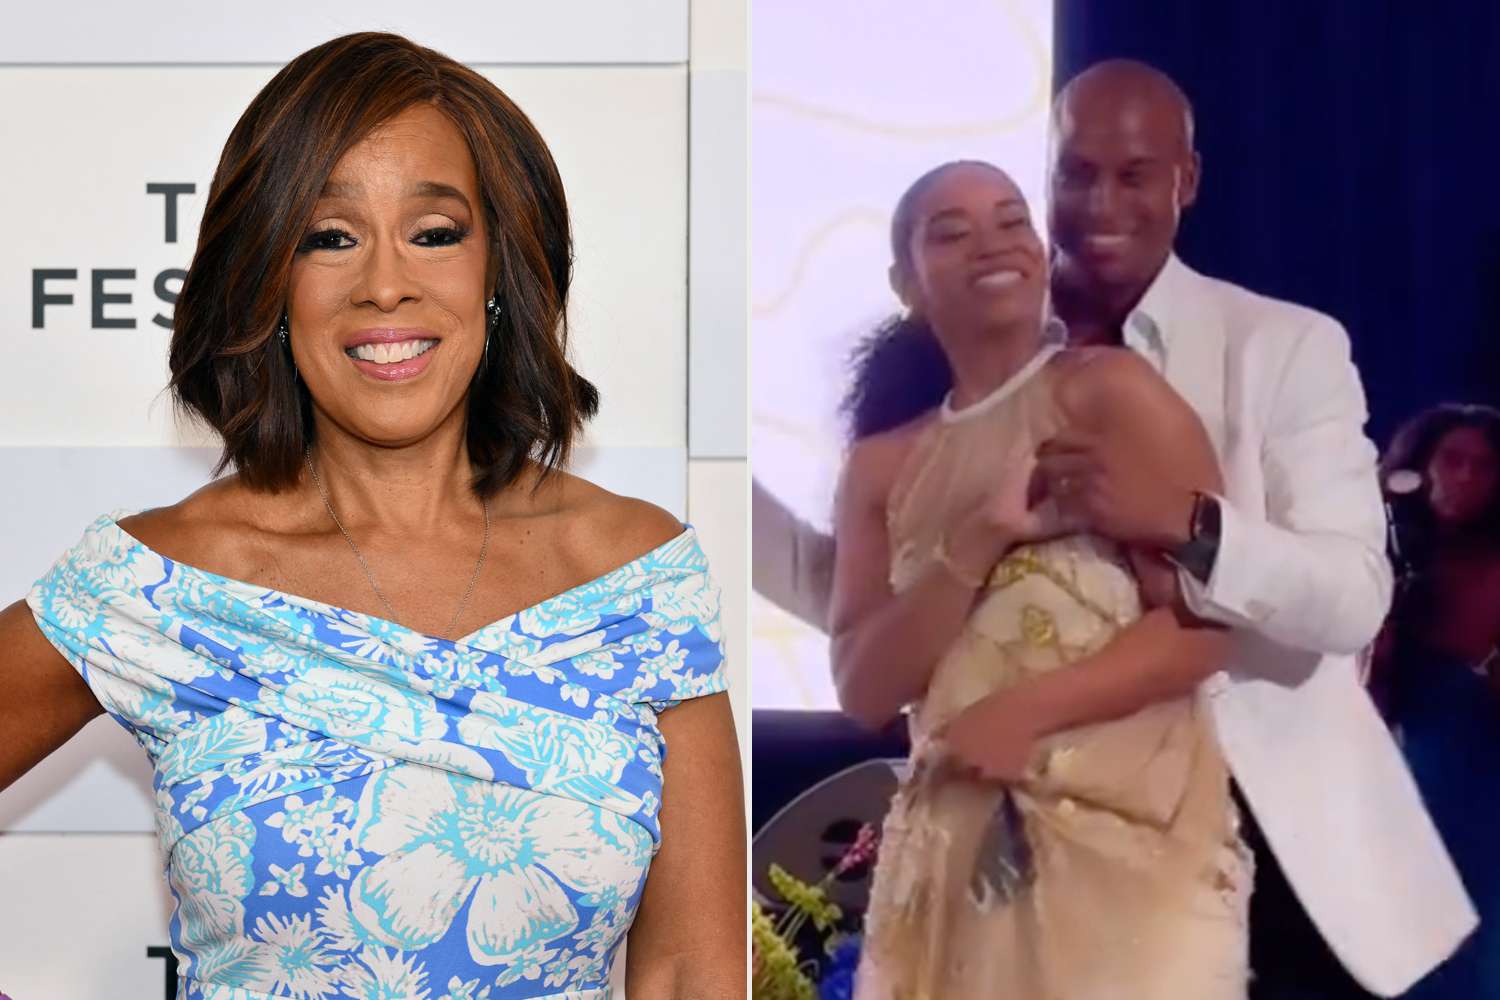 Gayle King Shares Clip of Son’s Romantic Wedding Dance: ‘Took Things to Another Level’